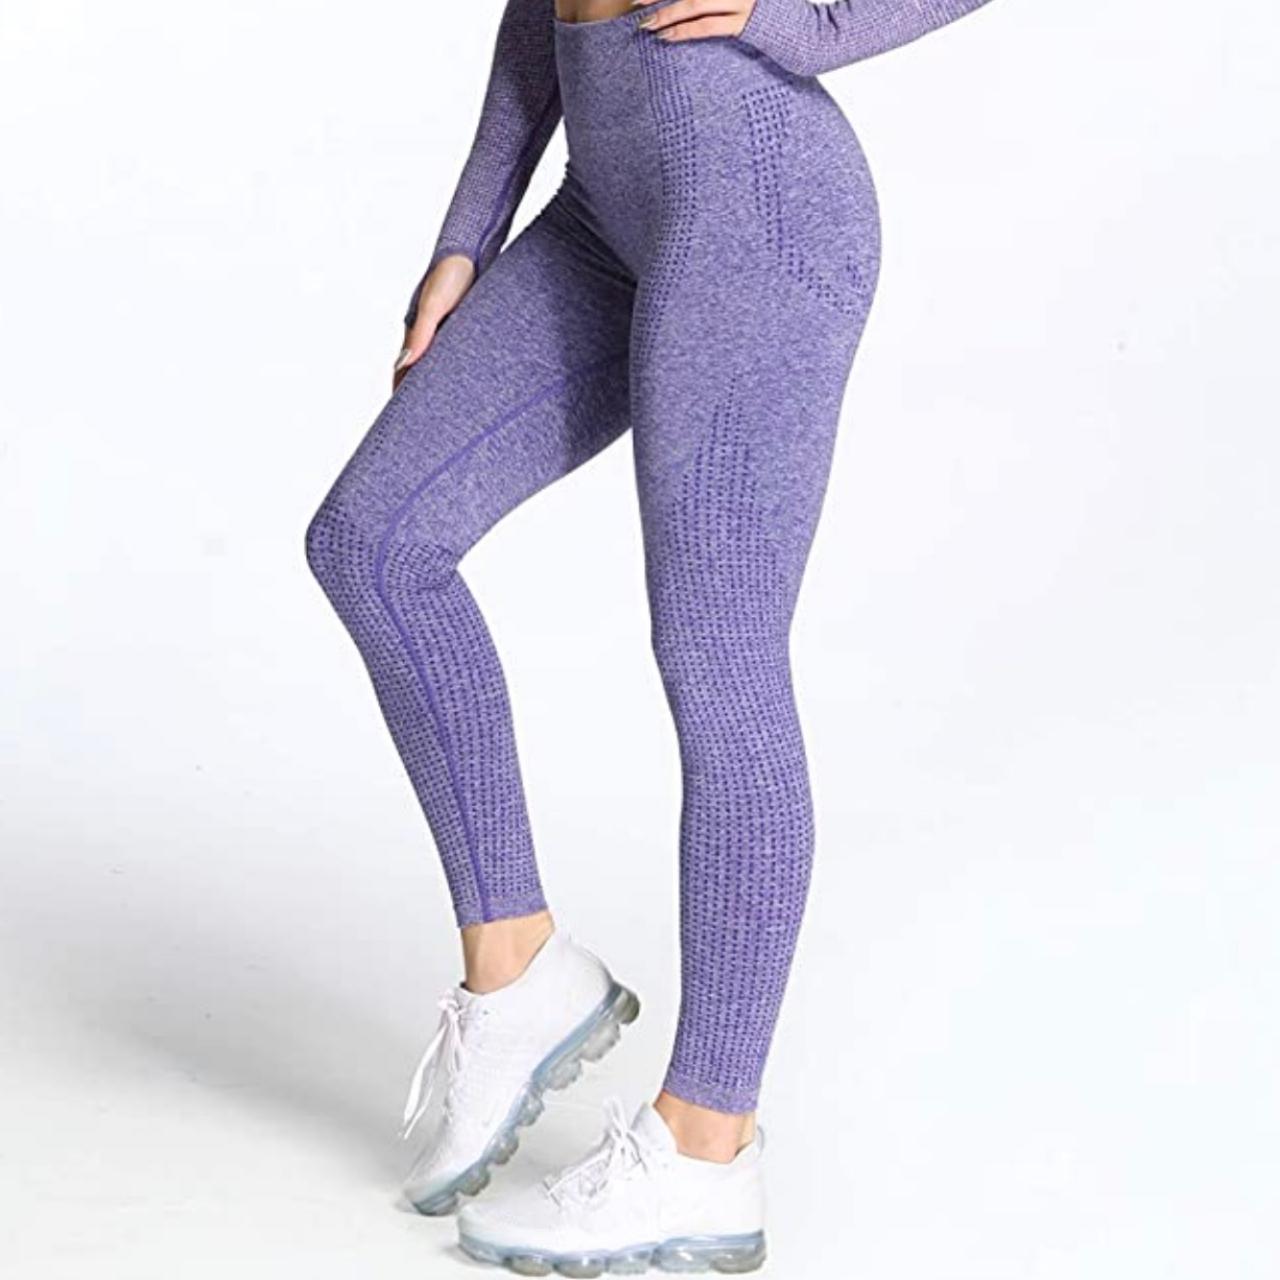 Workout Gear That Will Get You Motivated This Year, At Incredible